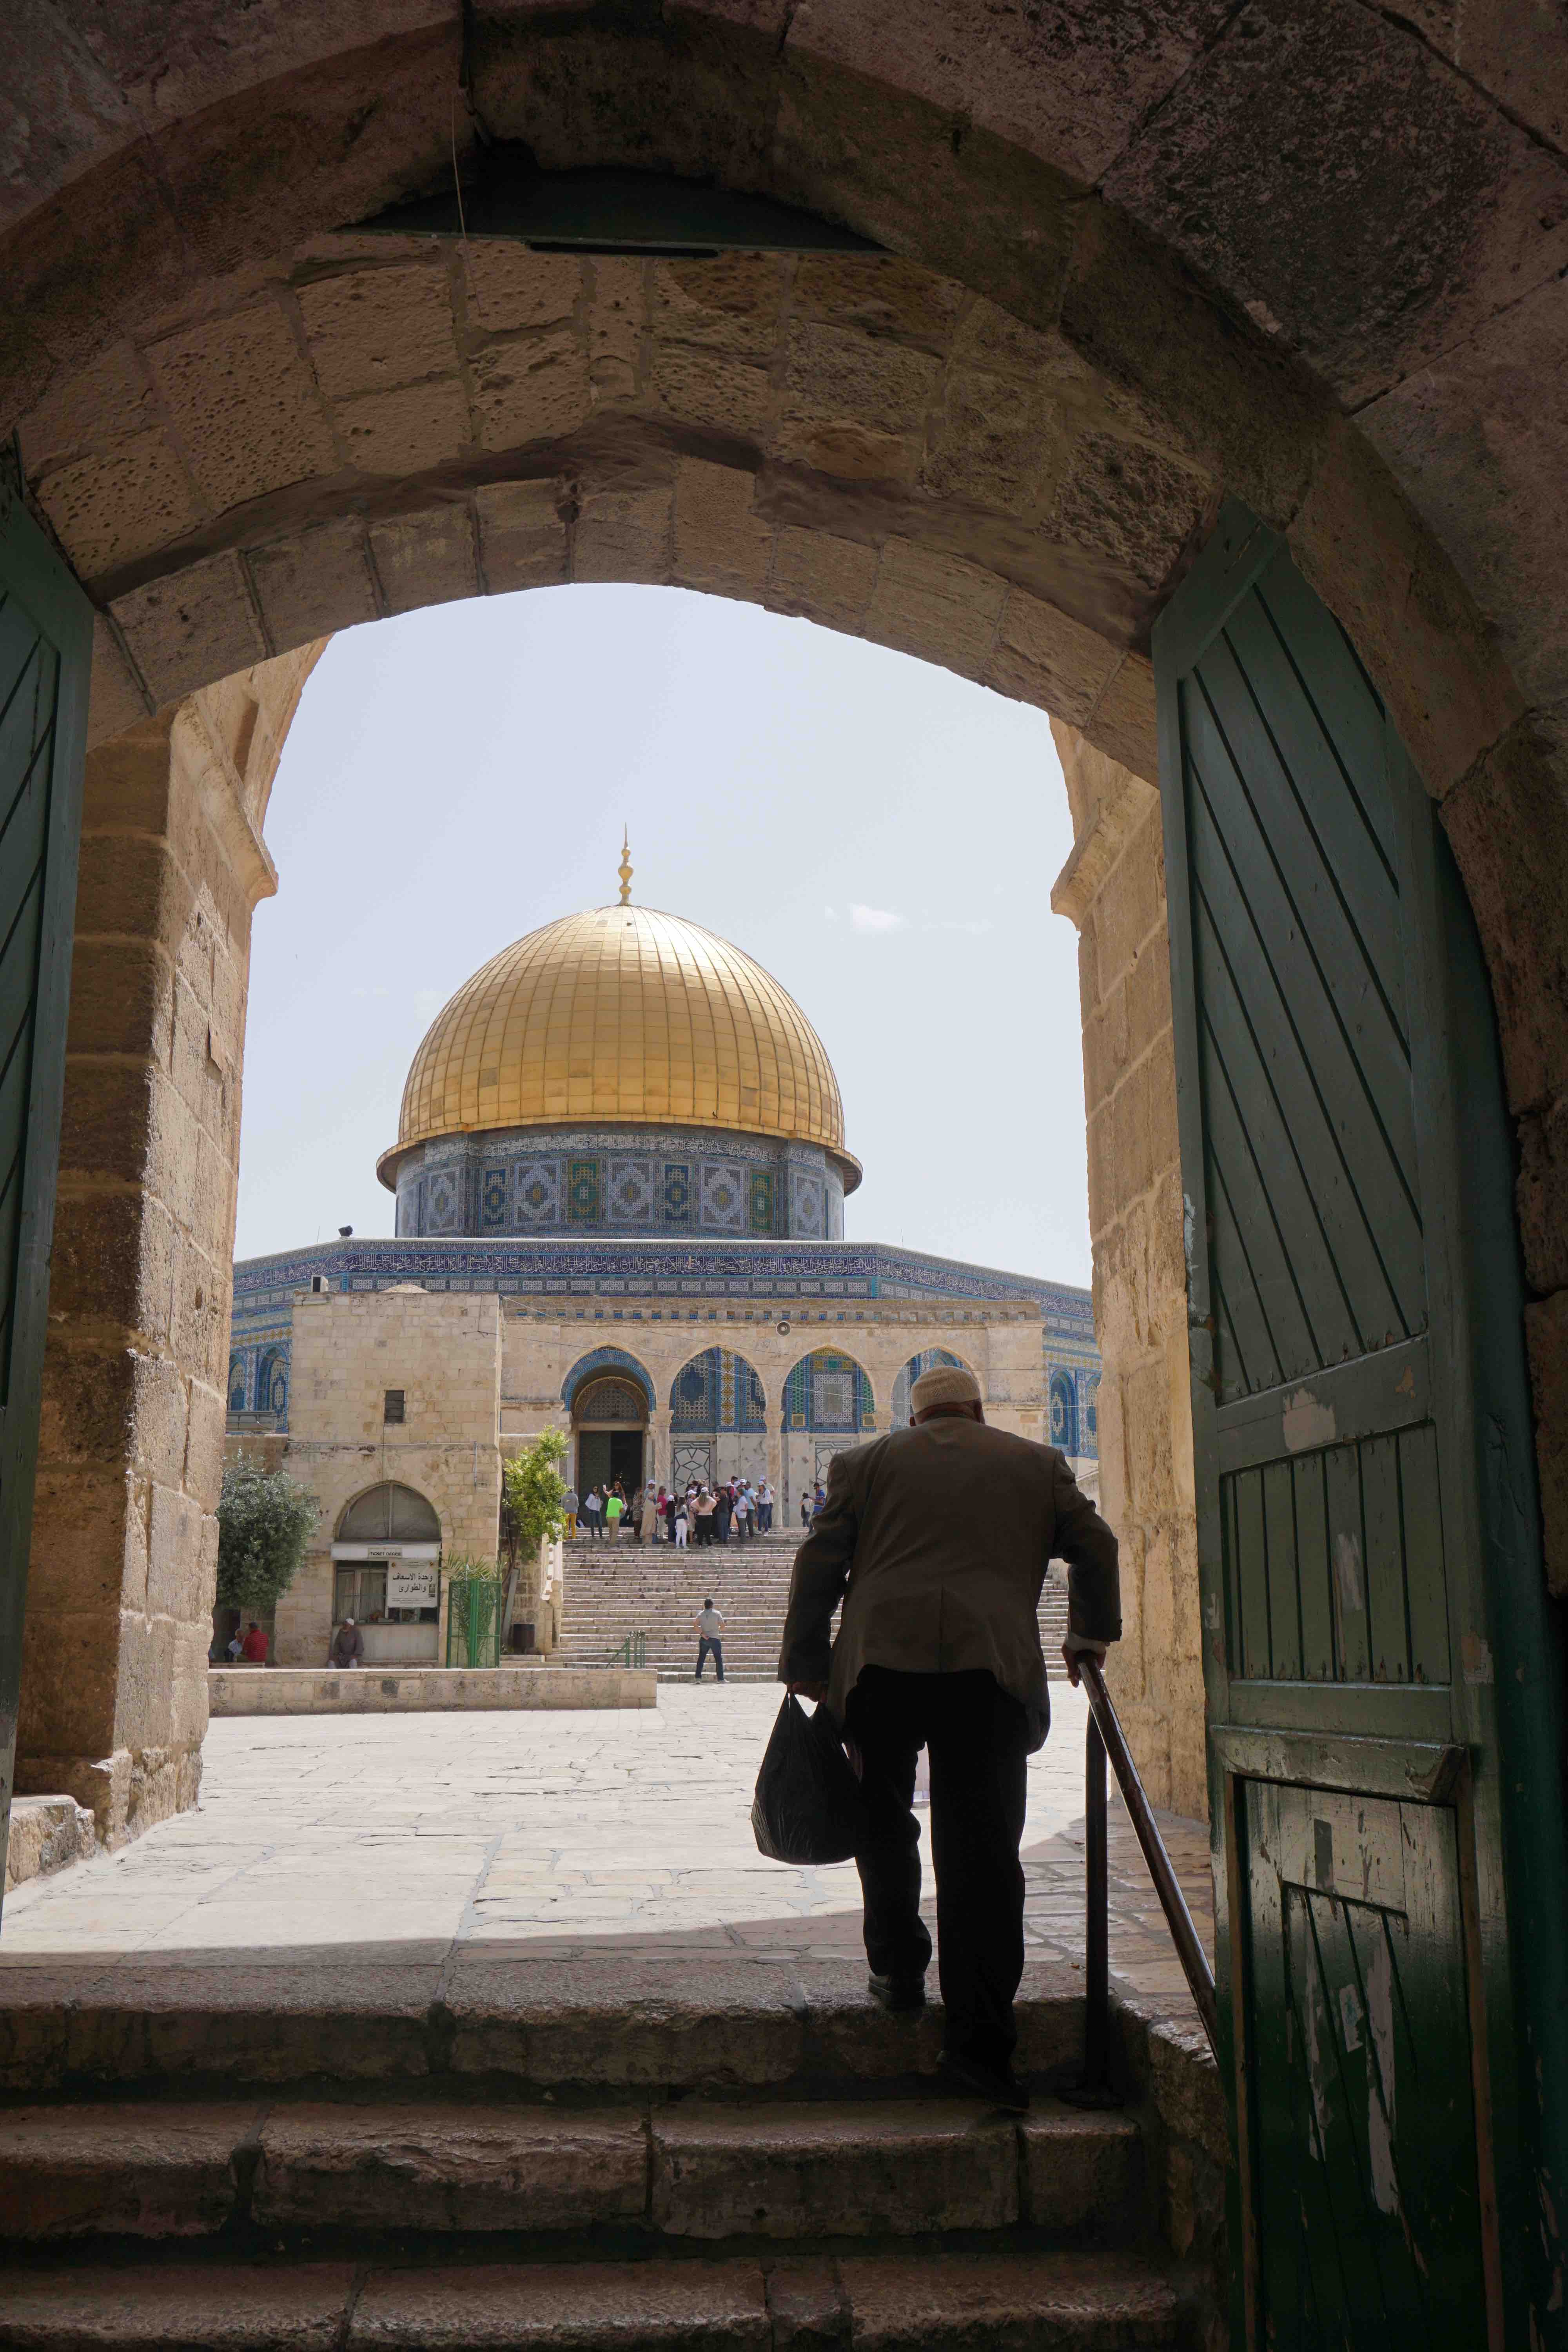 Access to the Dome of the Rock